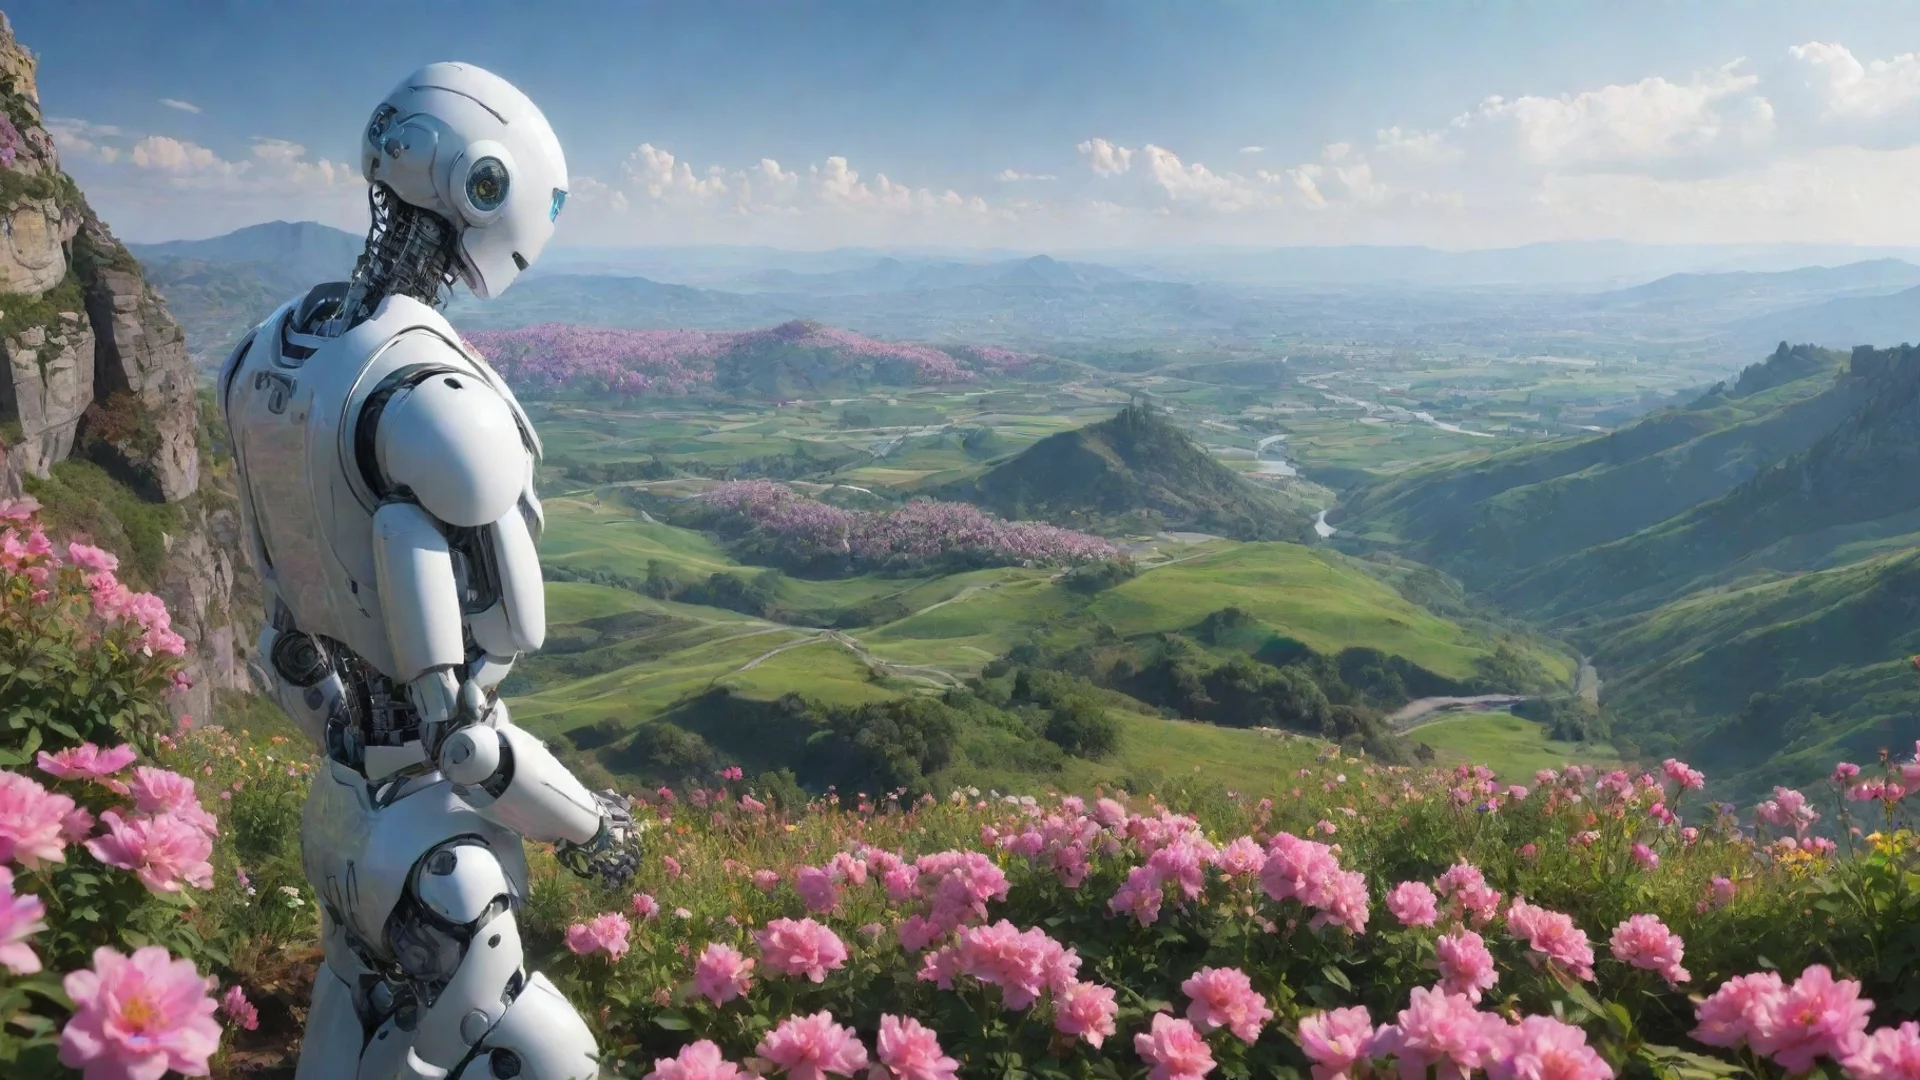 aiartstation art robot looking at sweeping views hd aesthetic best quality beautiful landscape environment flowers confident engaging wow 3 wide